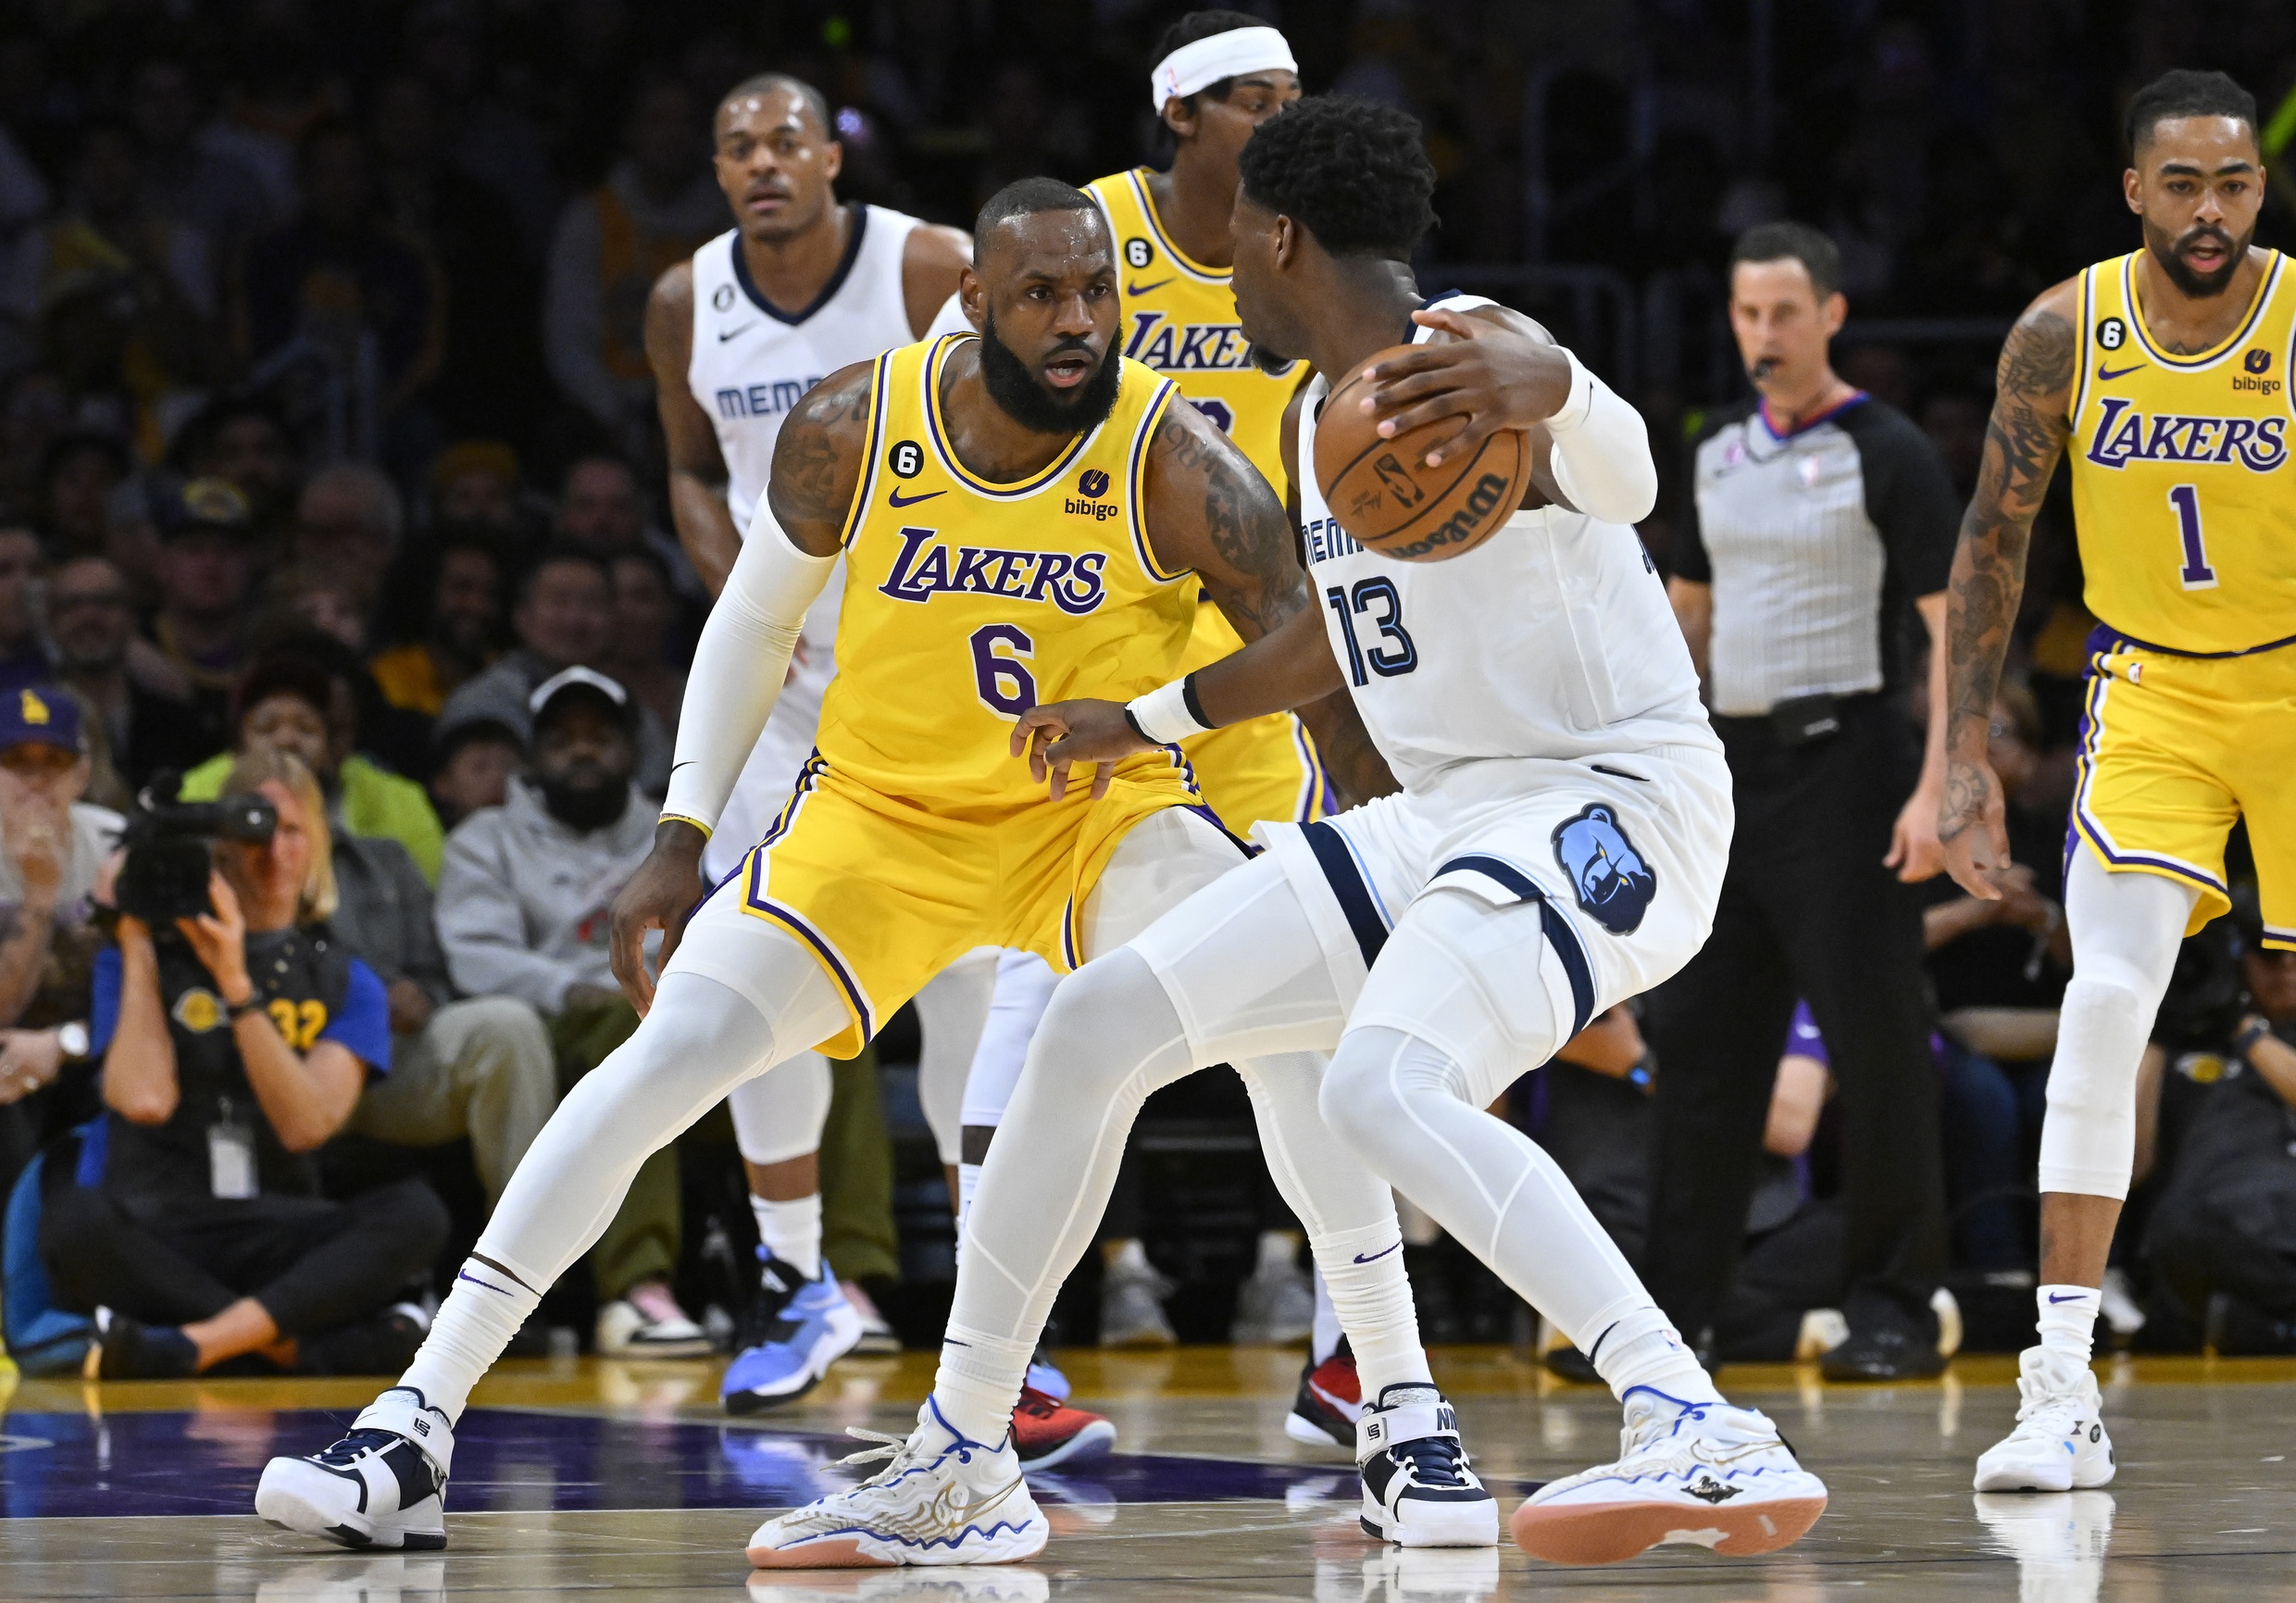 Apr 28, 2023; Los Angeles, California, USA; Los Angeles Lakers forward LeBron James (6) guards Memphis Grizzlies forward Jaren Jackson Jr. (13) in the first half of game six of the 2023 NBA playoffs at Crypto.com Arena. Mandatory Credit: Jayne Kamin-Oncea-USA TODAY Sports. Memphis looks to bounce back,